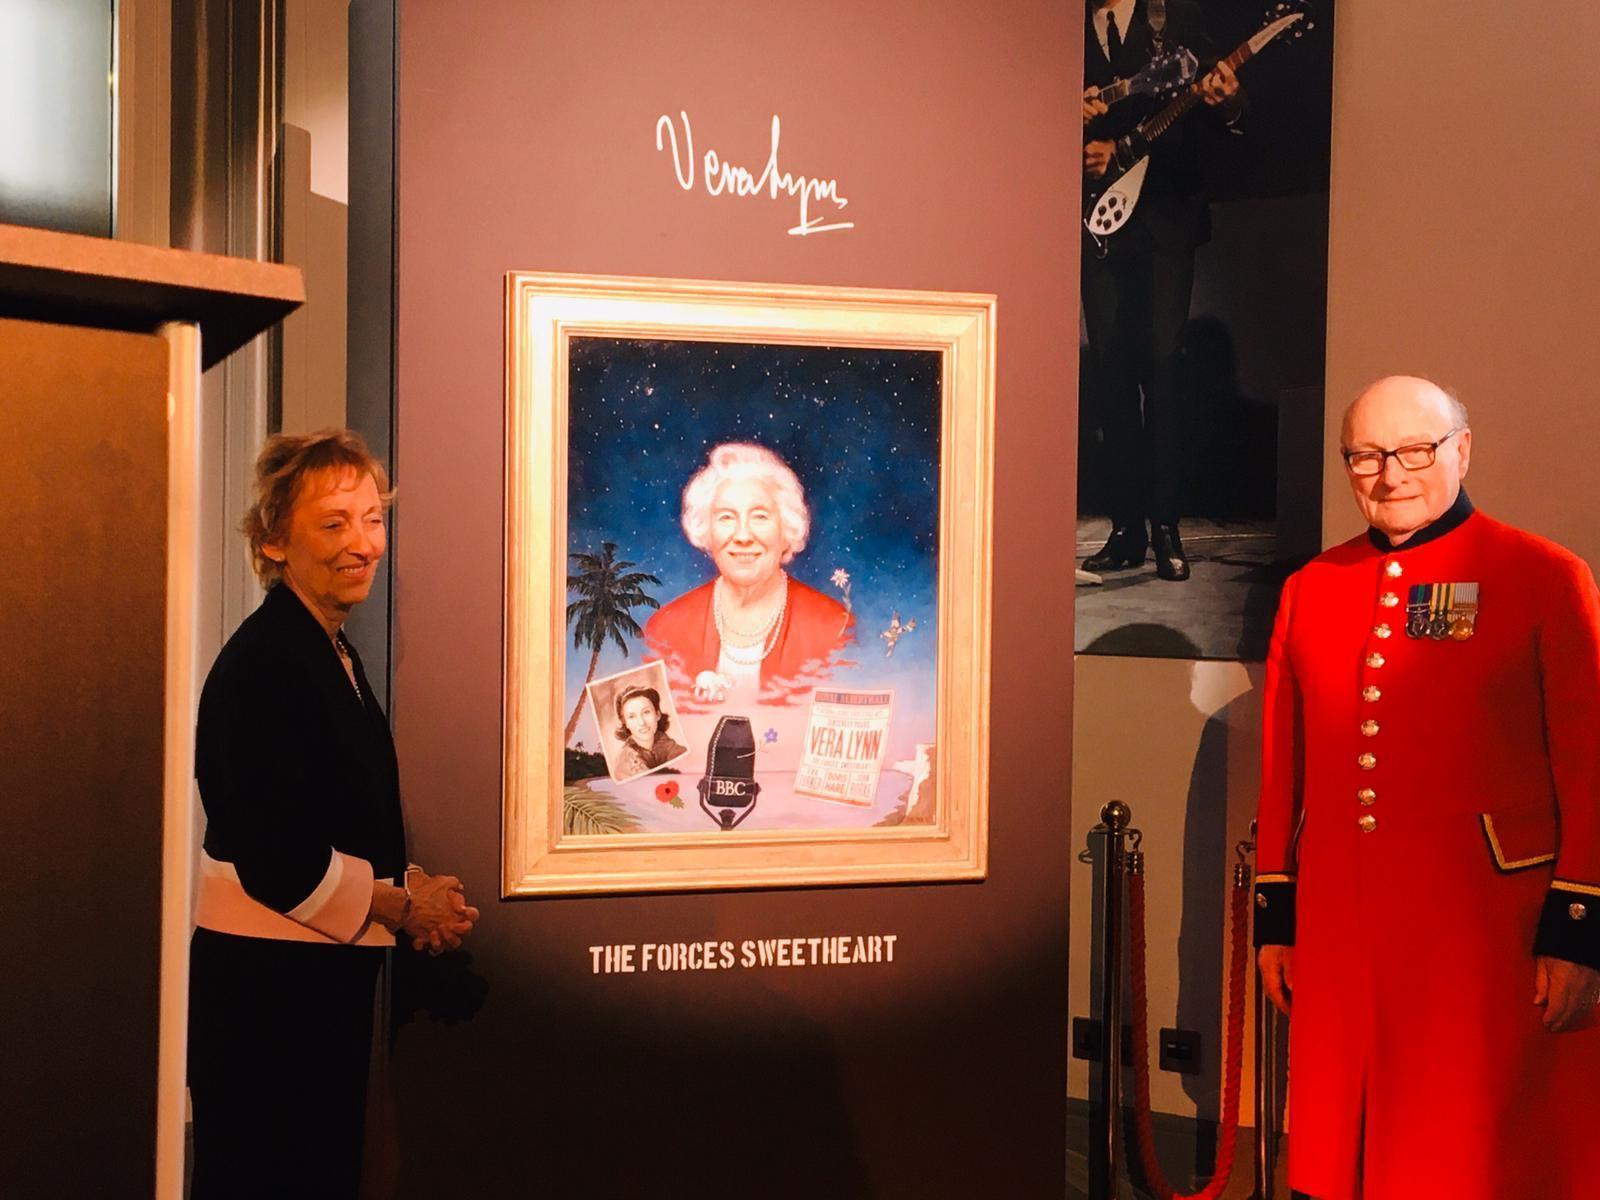 Dame Vera Lynn's daughter Virginia and Colin Thackery next to the portrait of Dame Vera Lynn